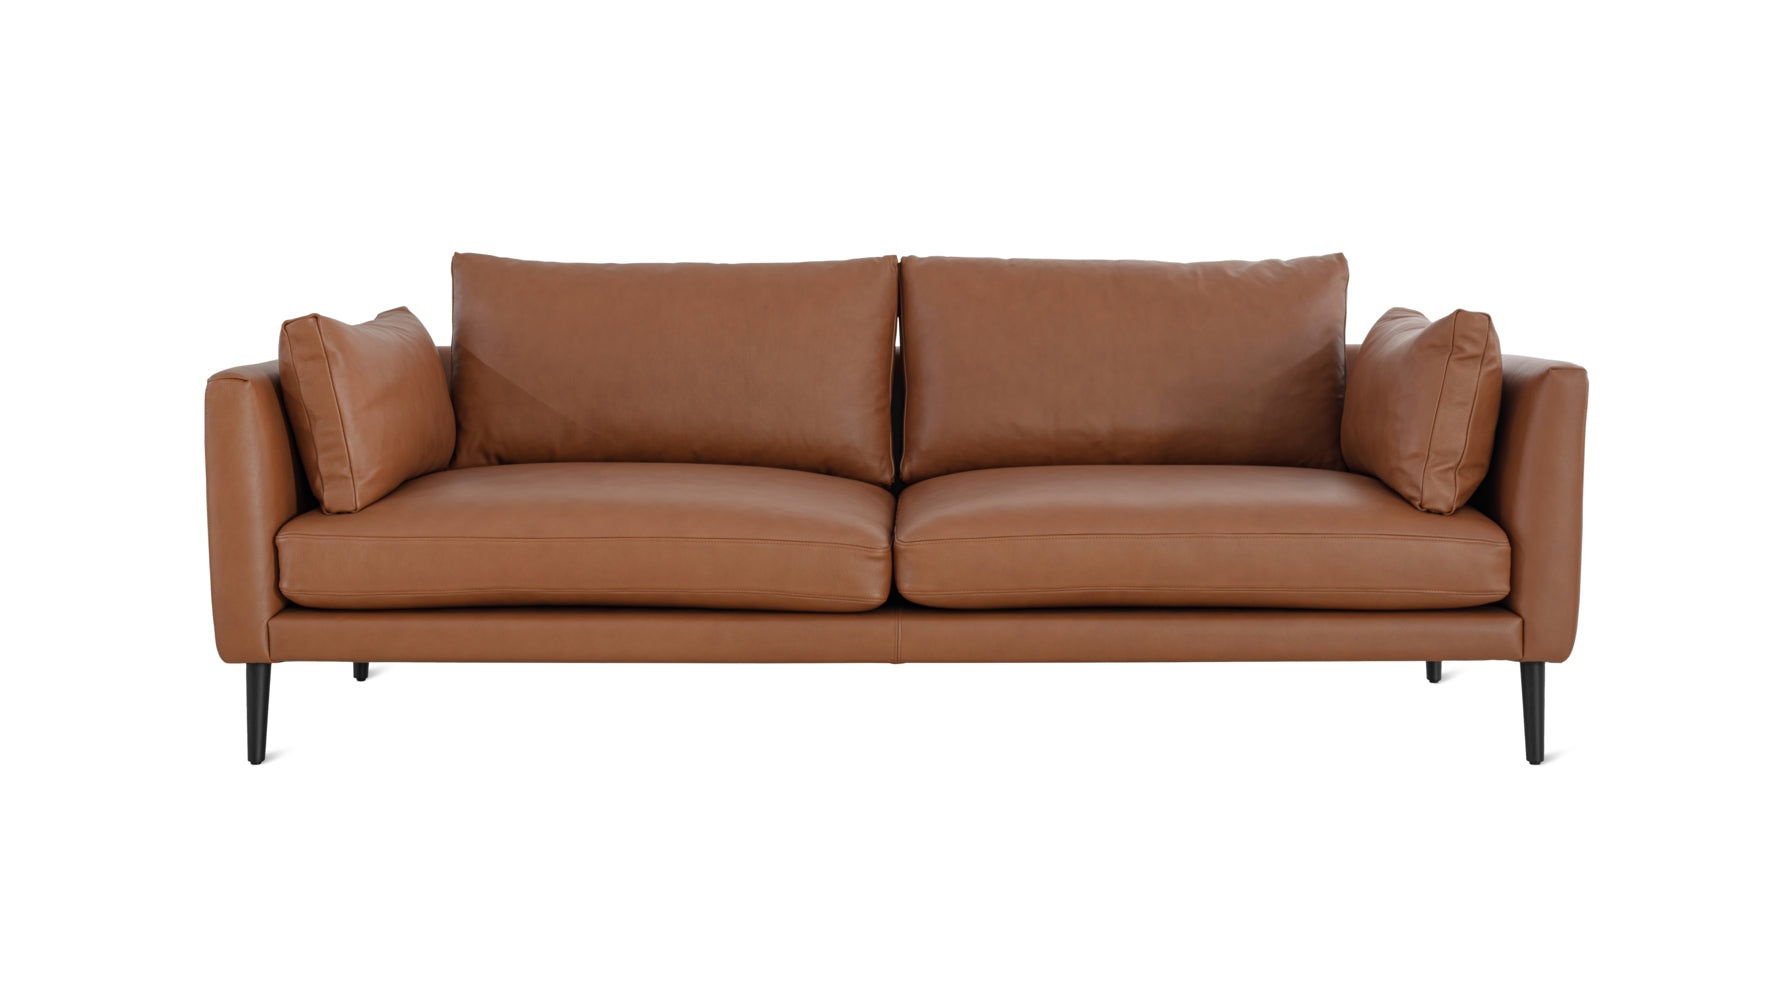 Stay A While Sofa, 2.5 Seater, Cigar - Image 1